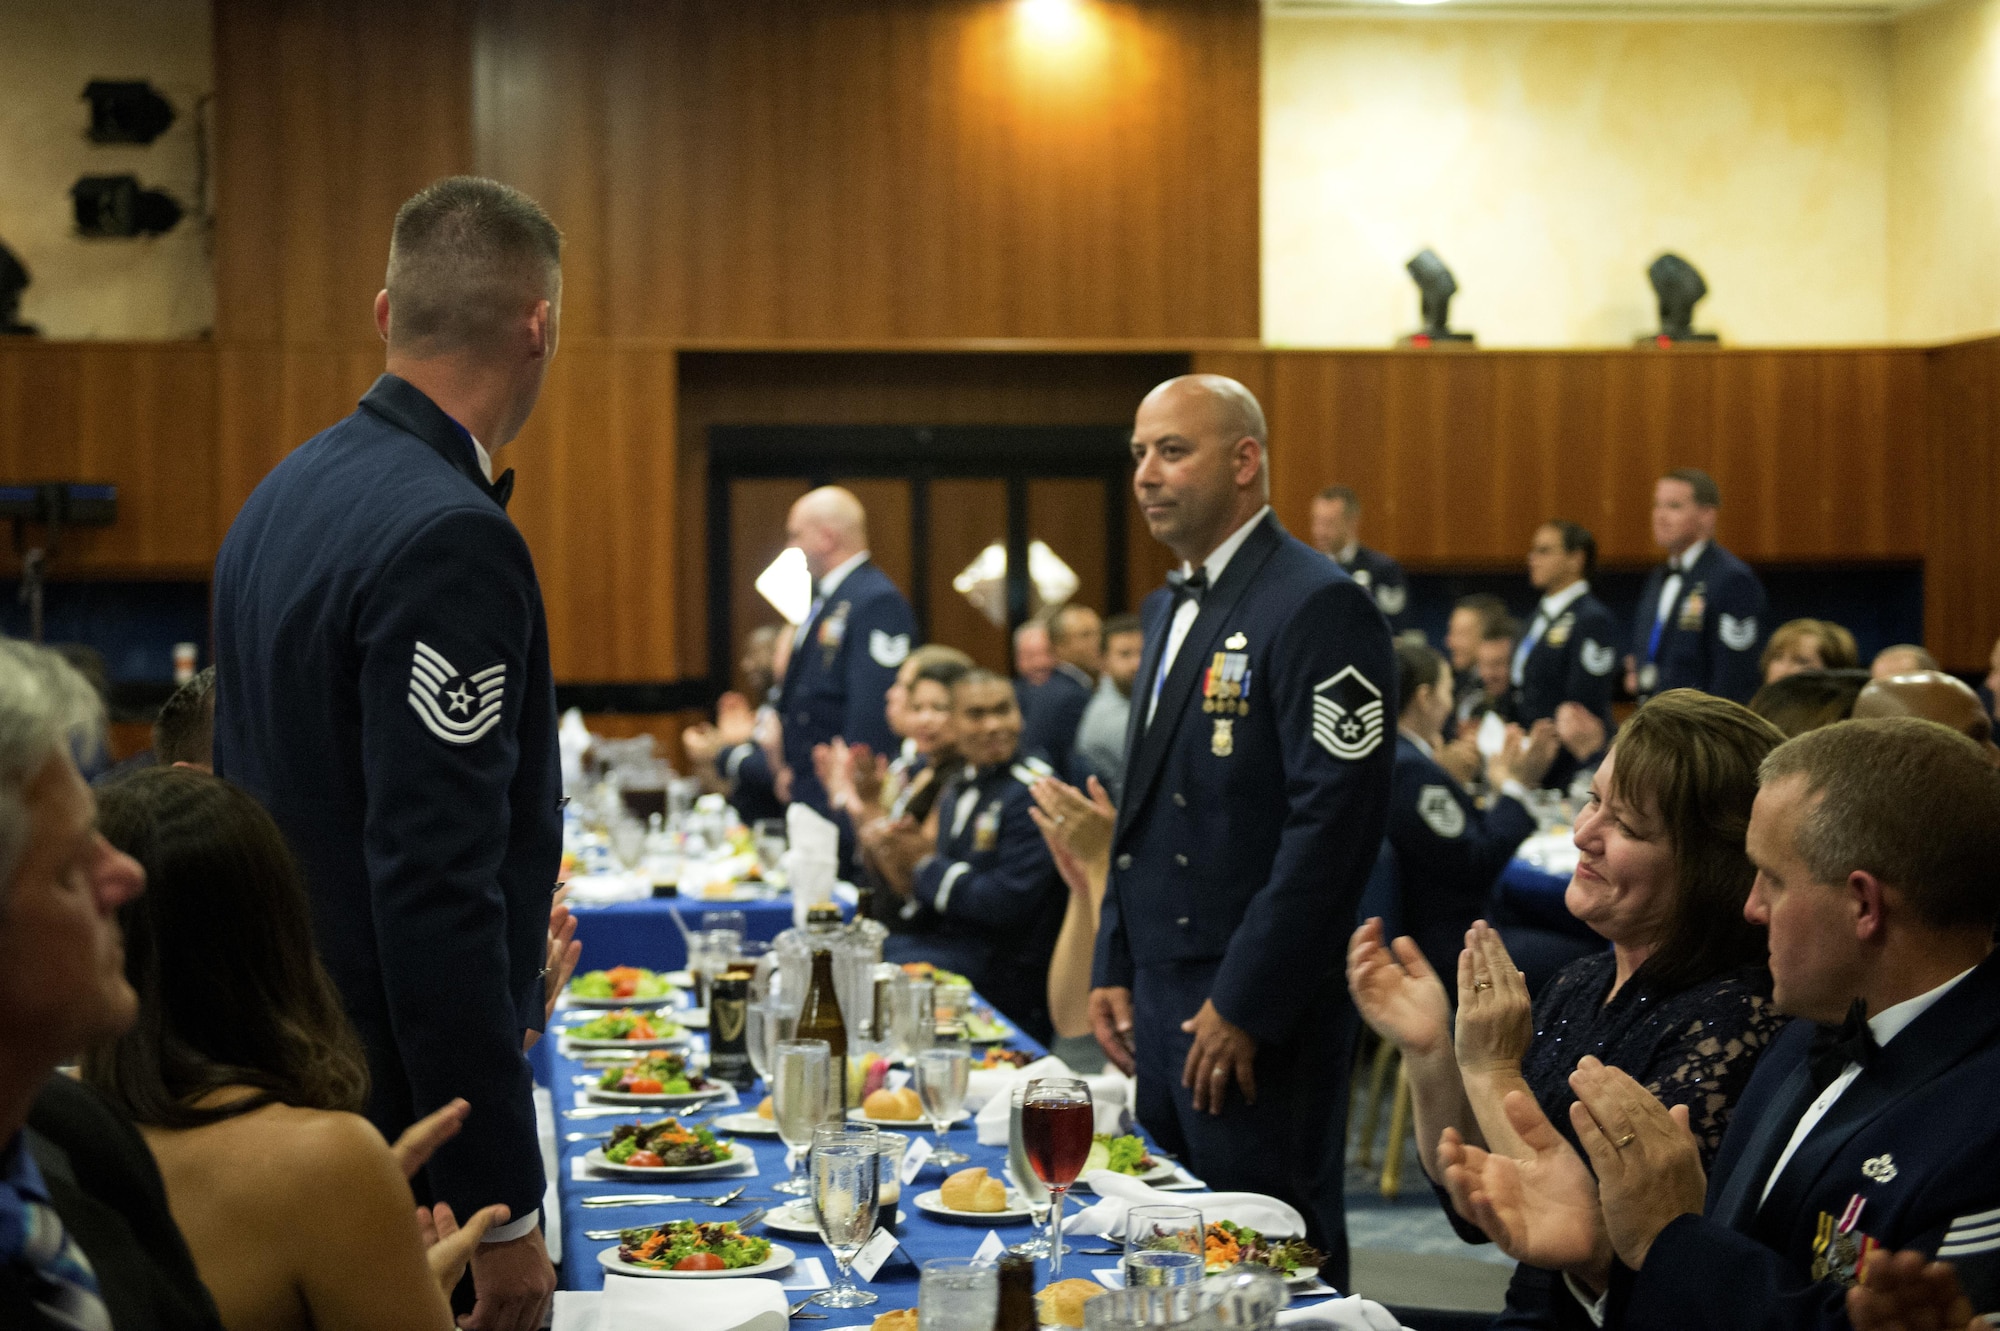 New U.S Air Force master sergeants and master sergeant-selects stand in recognition during a senior NCO induction ceremony at Club Eifel on Spangdahlem Air Base, Germany, Aug. 12, 2016. More than four dozen members received congratulations for their accomplishment of joining the top tier enlisted force. (U.S. Air Force photo by Airman 1st Class Preston Cherry/Released)